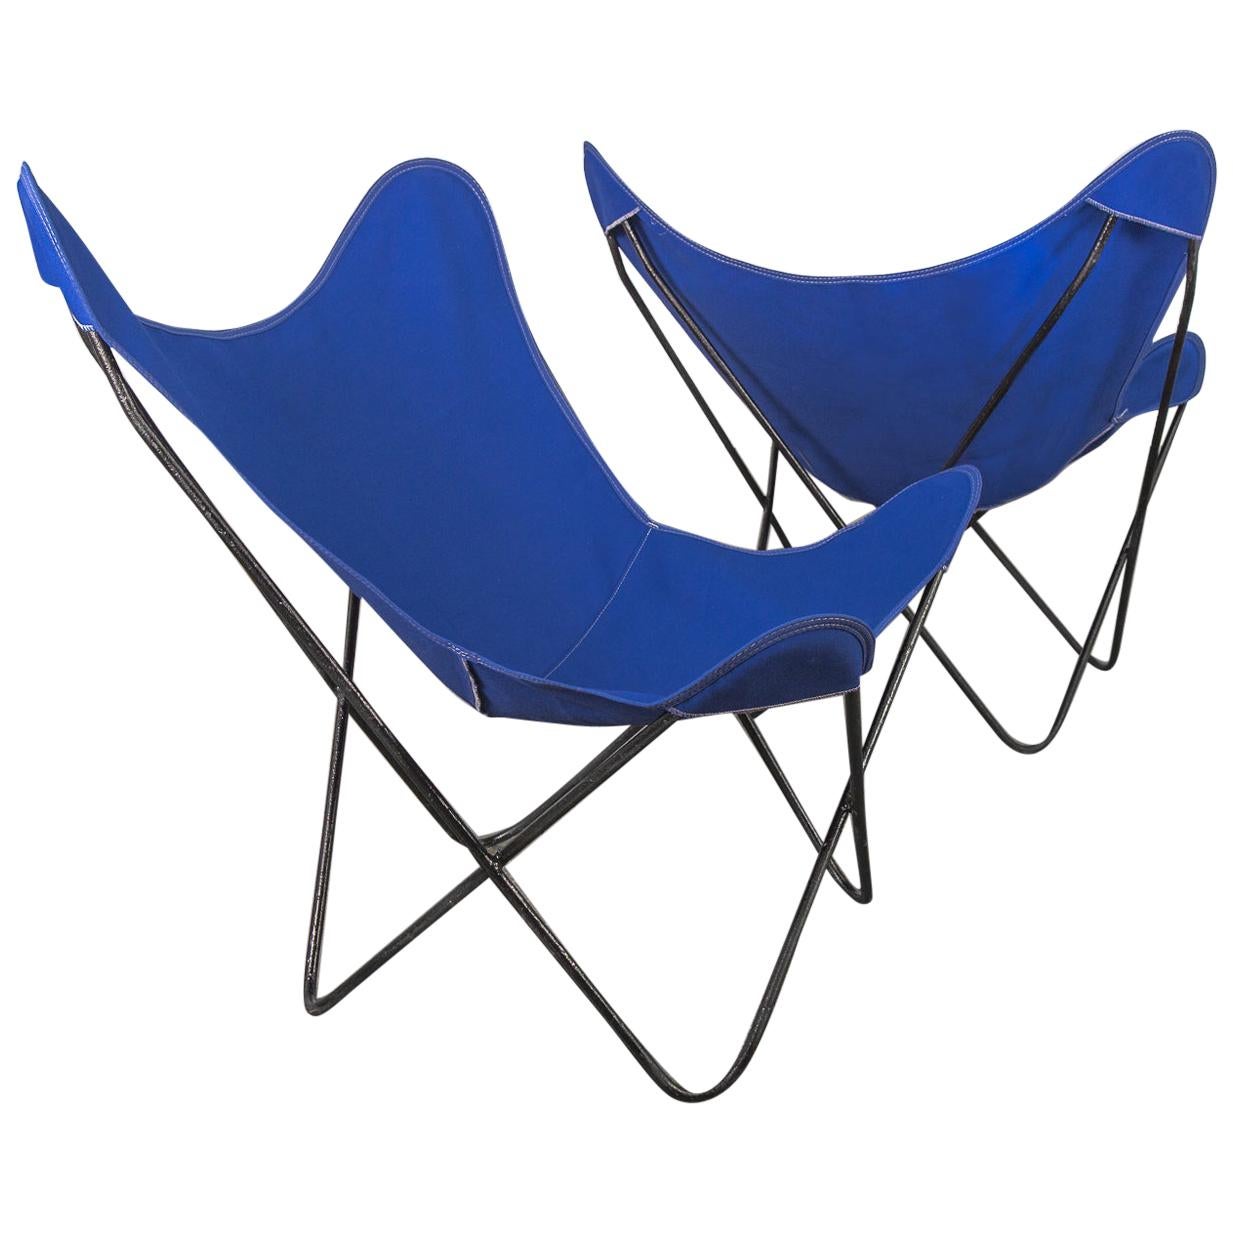 Pair of BKF Hardoy Butterfly Chairs for Knoll in Cobalt Blue